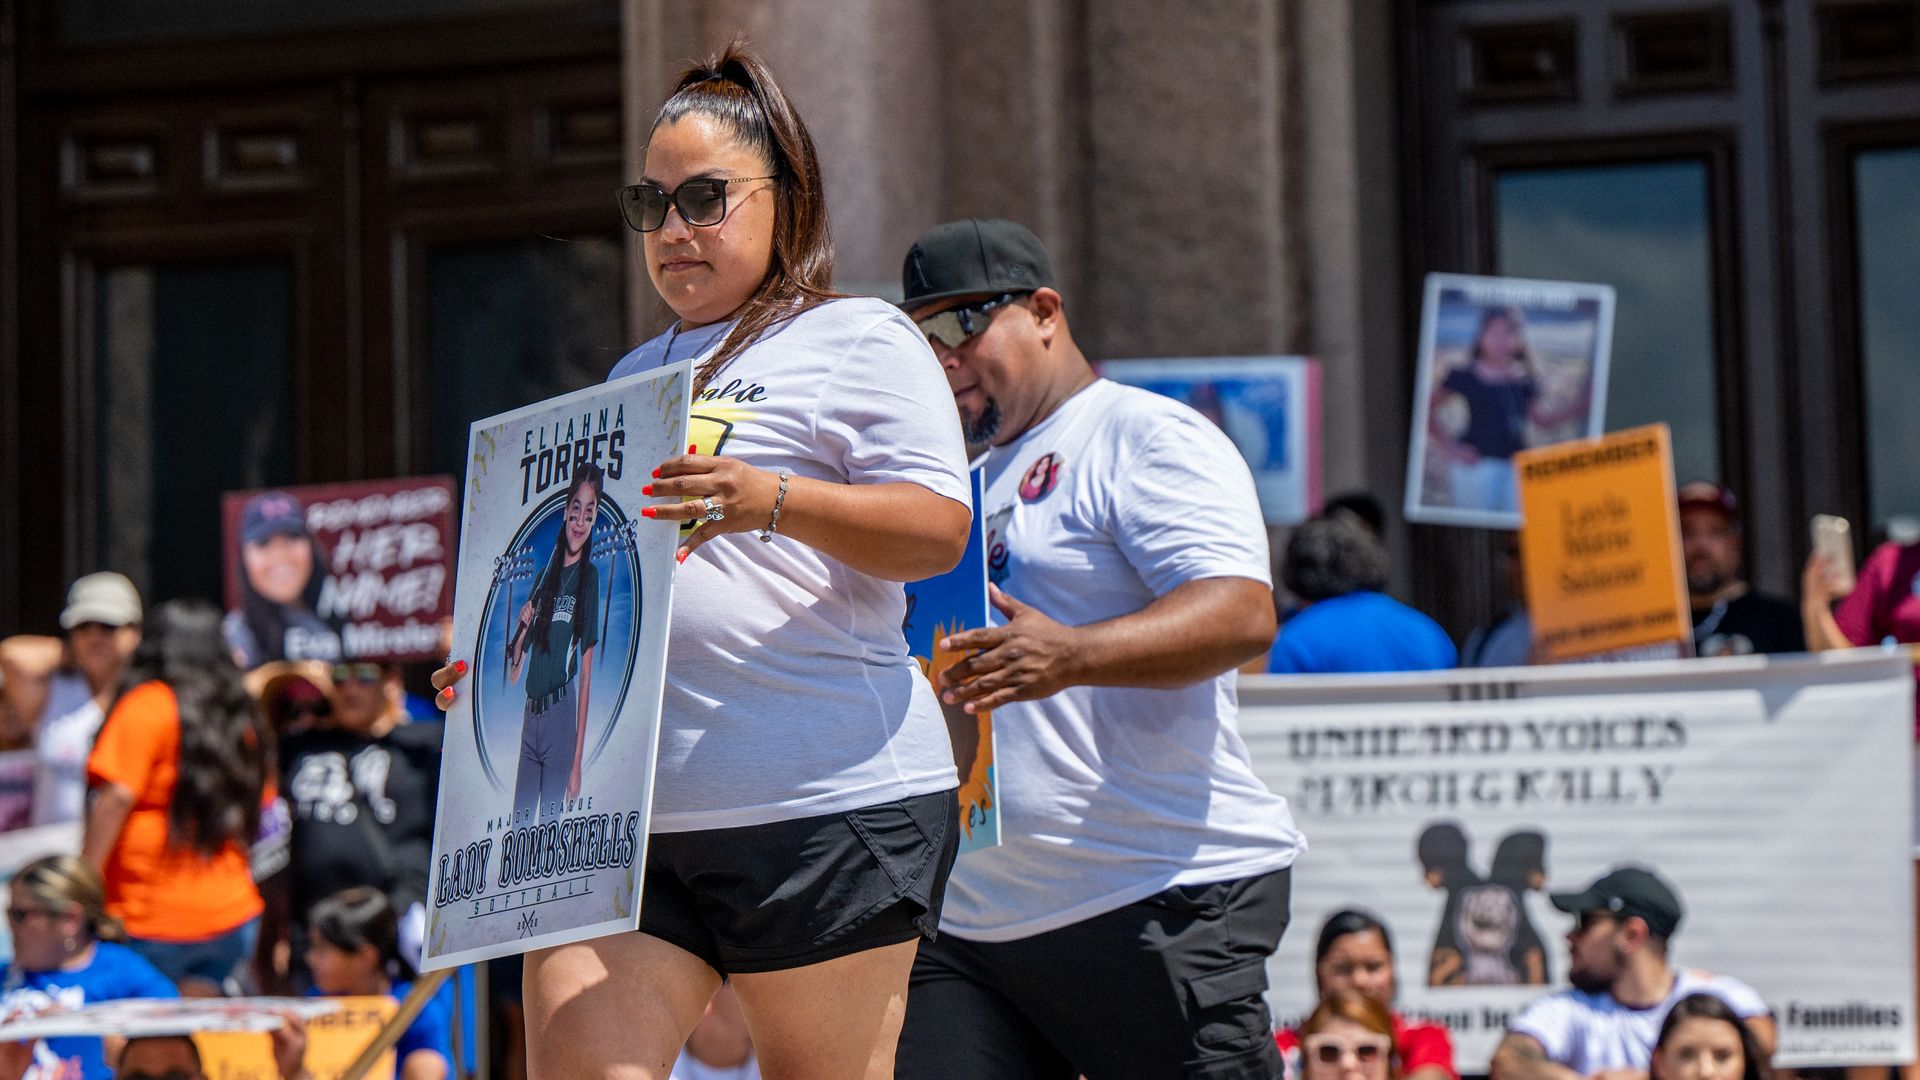 A woman holding a sign with a little girl's picture, an Uvalde victim, marches outside the Texas capitol